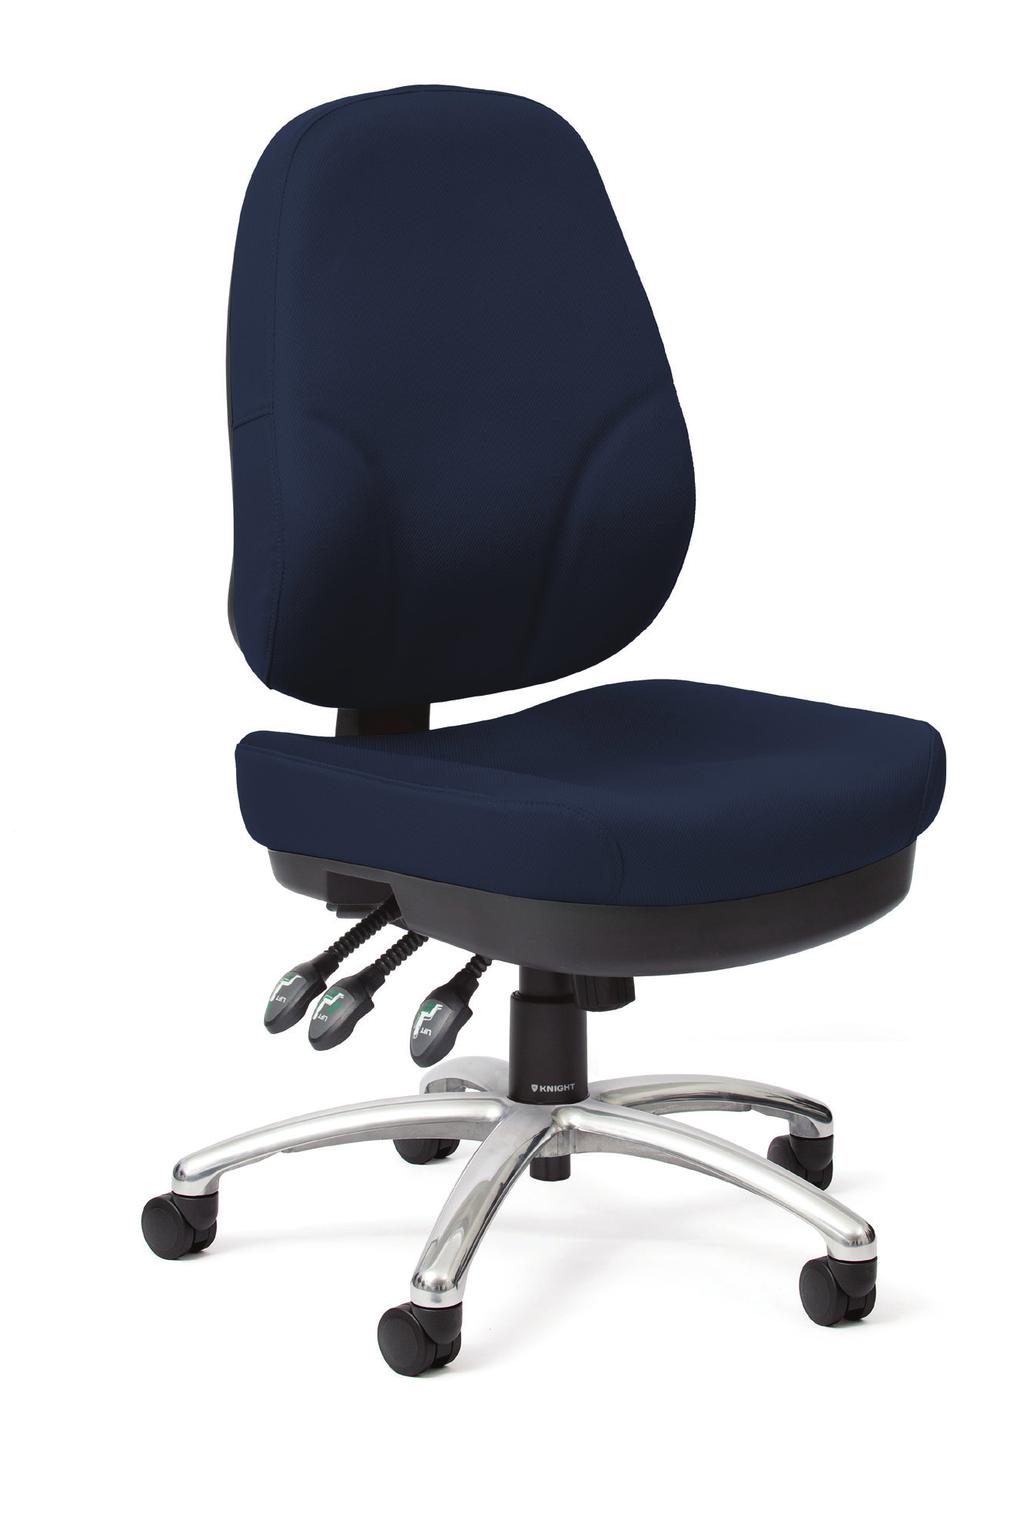 Heavy Duty Plymouth A BIG CHAIR for larger bodies. Plush high back with specially molded high density foam for HEAVY DUTY COMFORT. You ve only got one back and we help you to look after it!